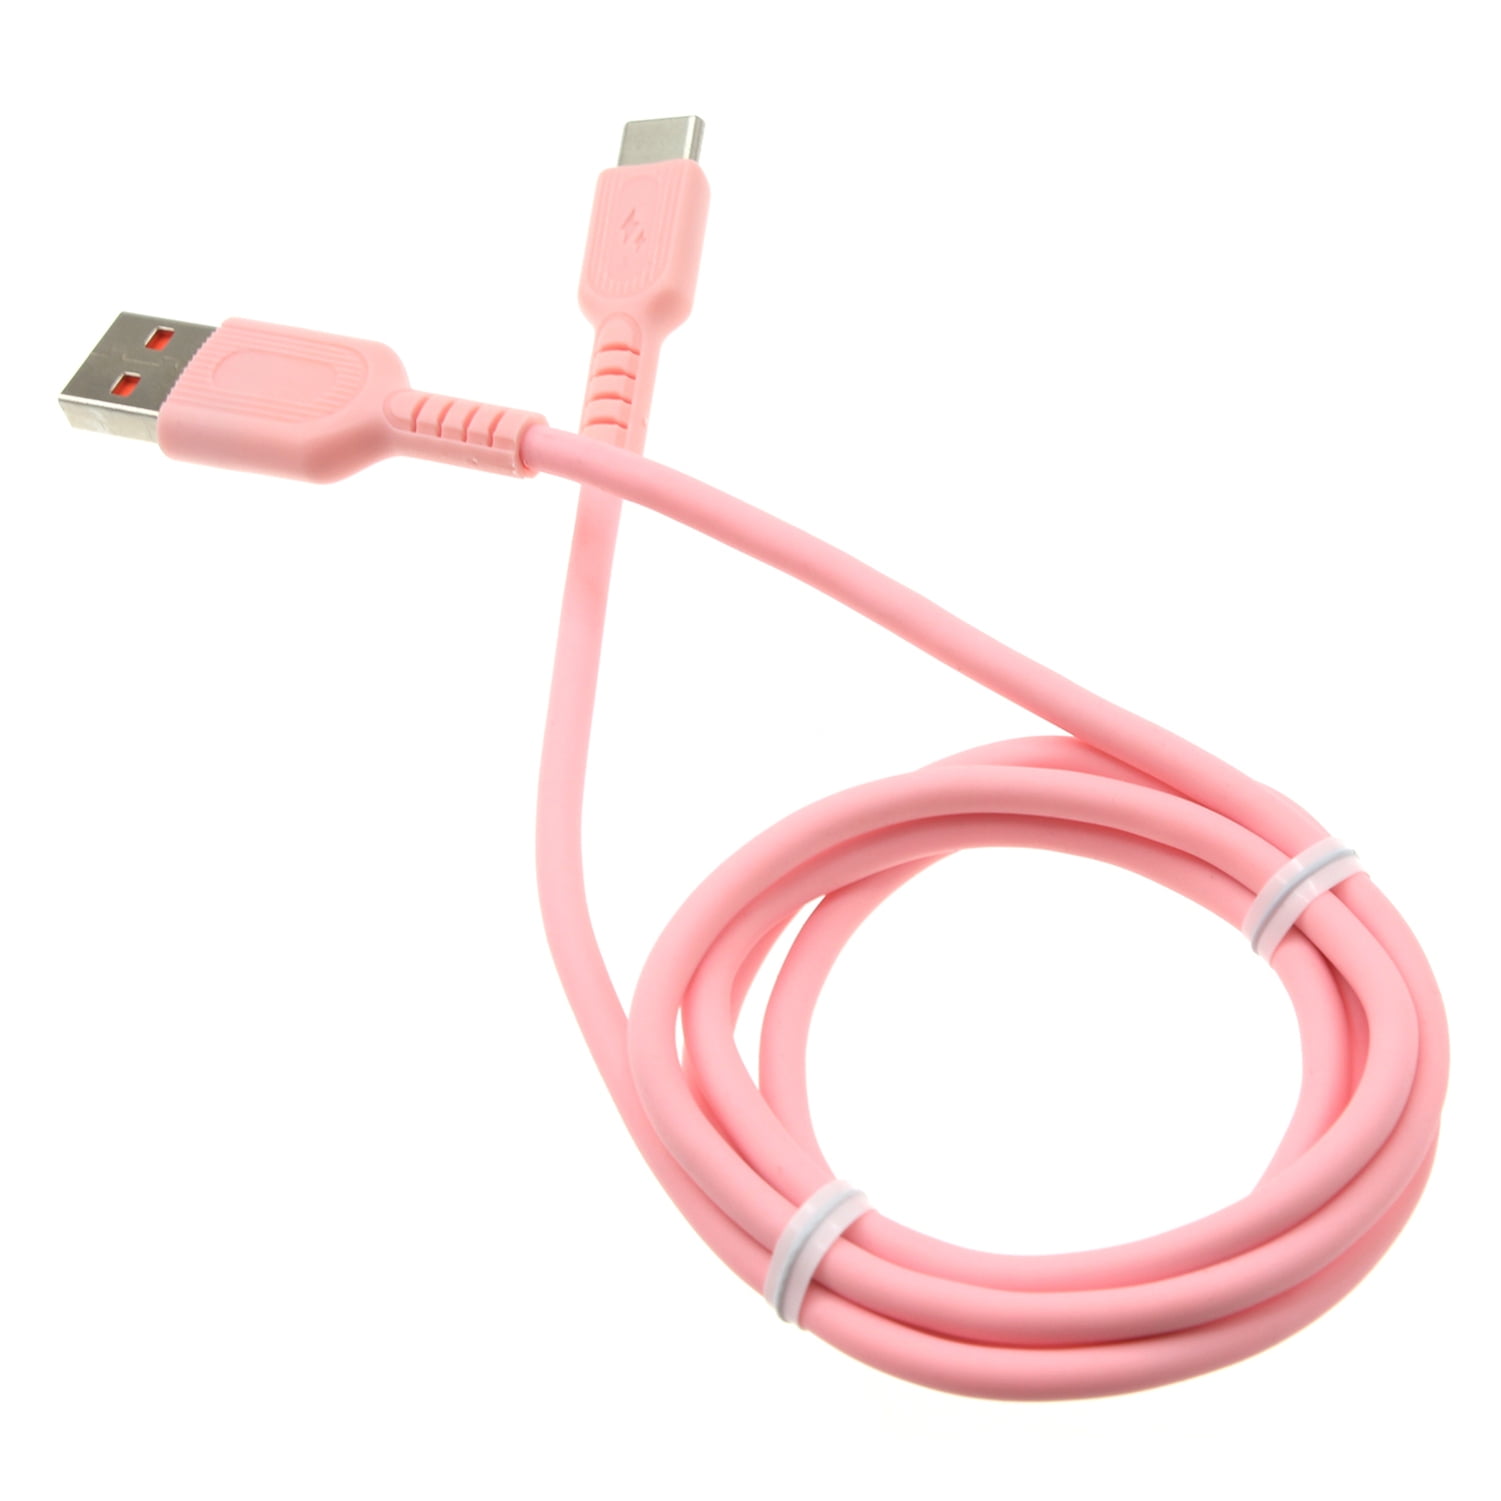 Multi Quick USB Charging Cable,Rose 2 in1 Fast Charger Cord Connector High Speed Durable Charging Cord Compatible with iPhone/Tablets/Samsung Galaxy/iPad and More